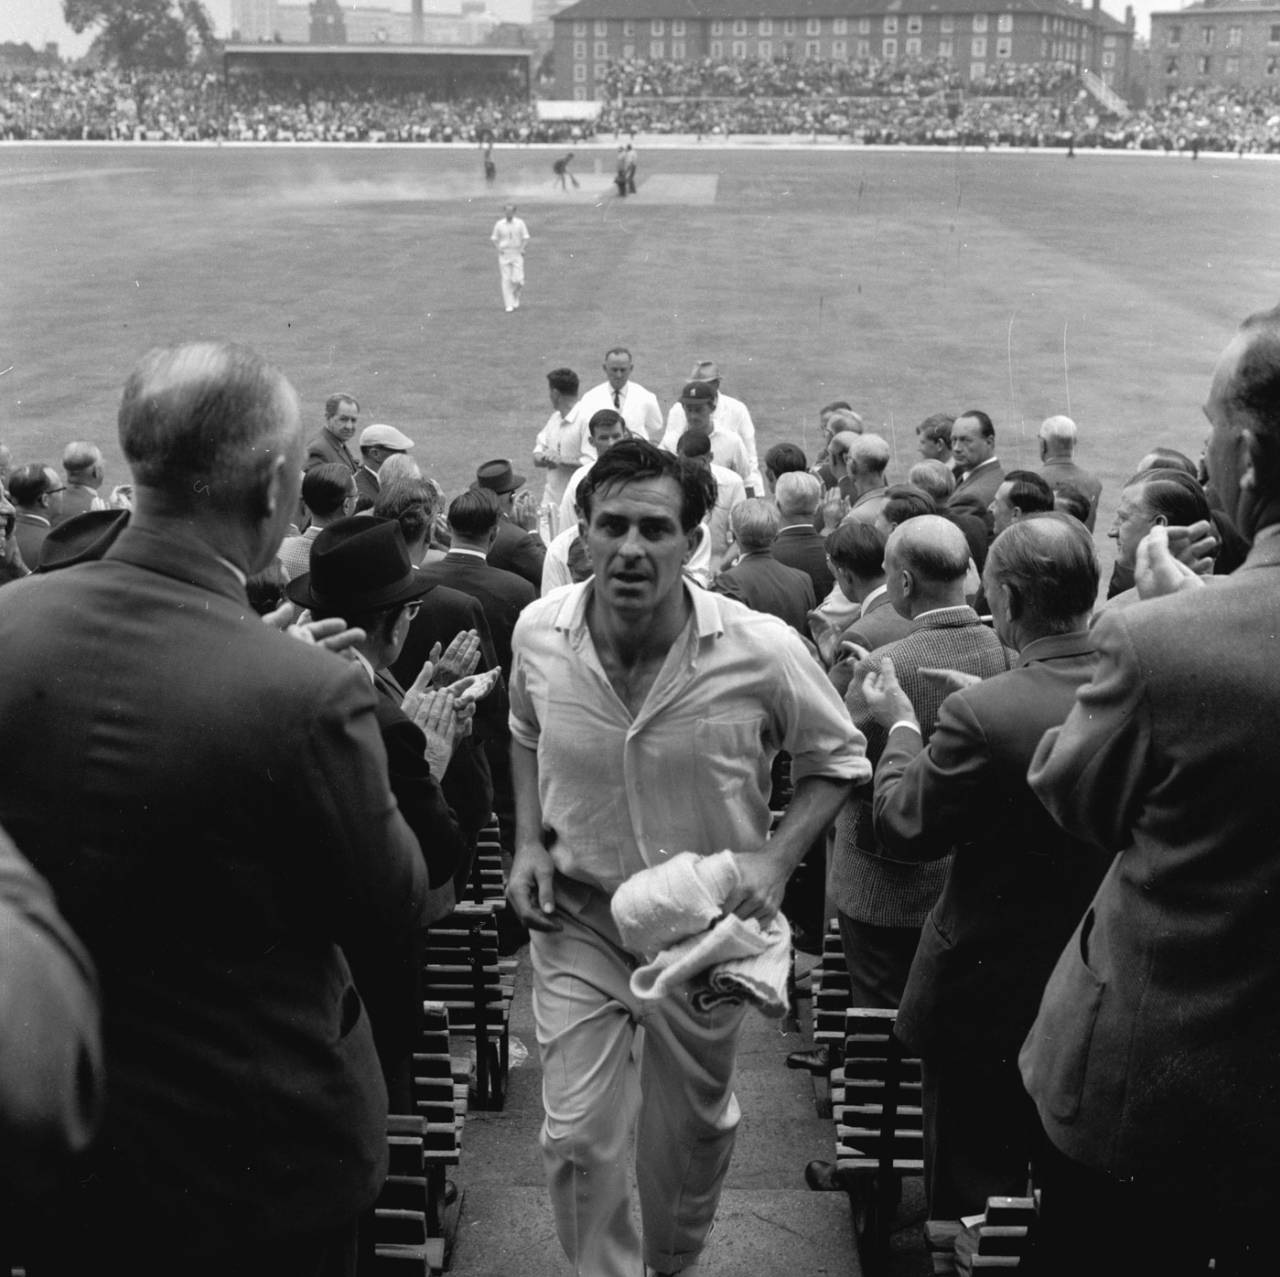 Fred Trueman: not only deadly but had more curses than Captain Haddock&nbsp;&nbsp;&bull;&nbsp;&nbsp;Getty Images